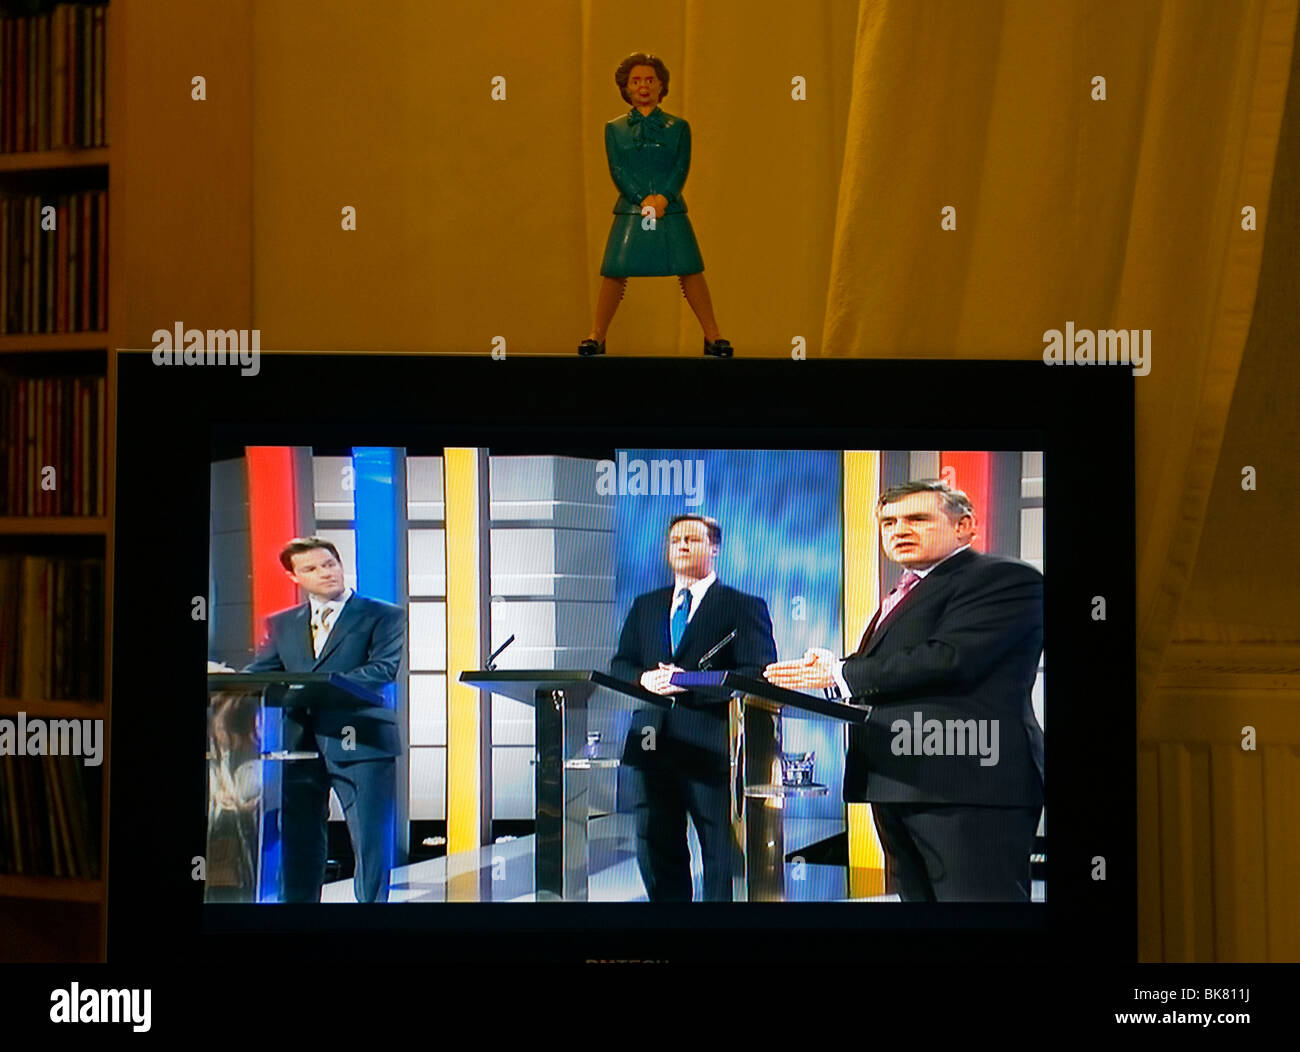 The first three leaders election debate watched over by a 'Nut cracker' - Margaret Thatcher' in the photographers living room. Stock Photo